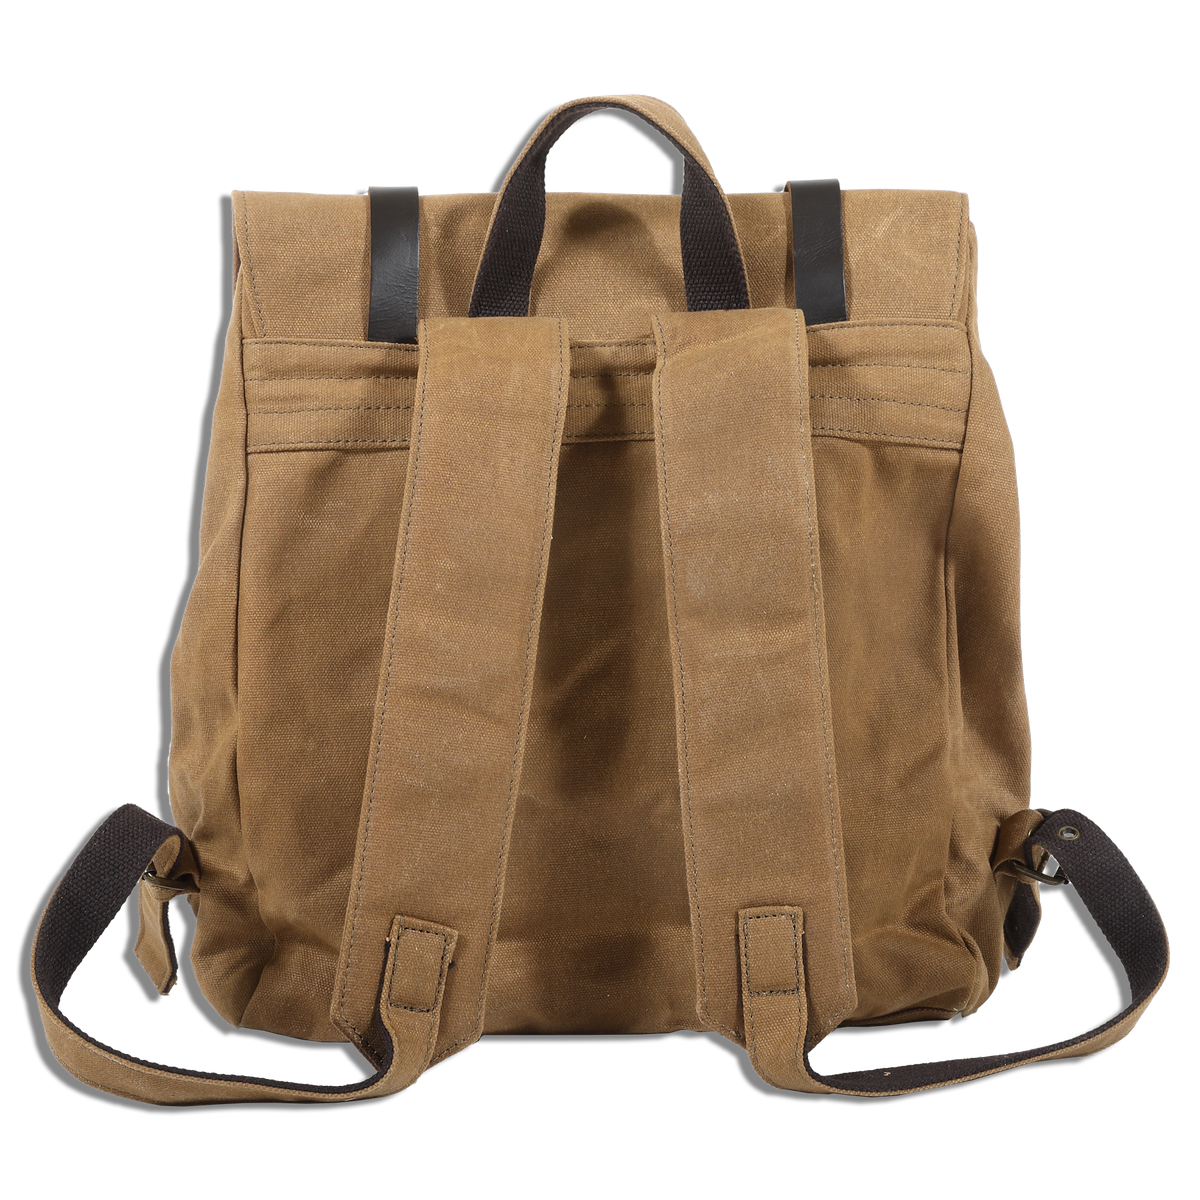 B-Line 07 Wax Cotton Back Pack